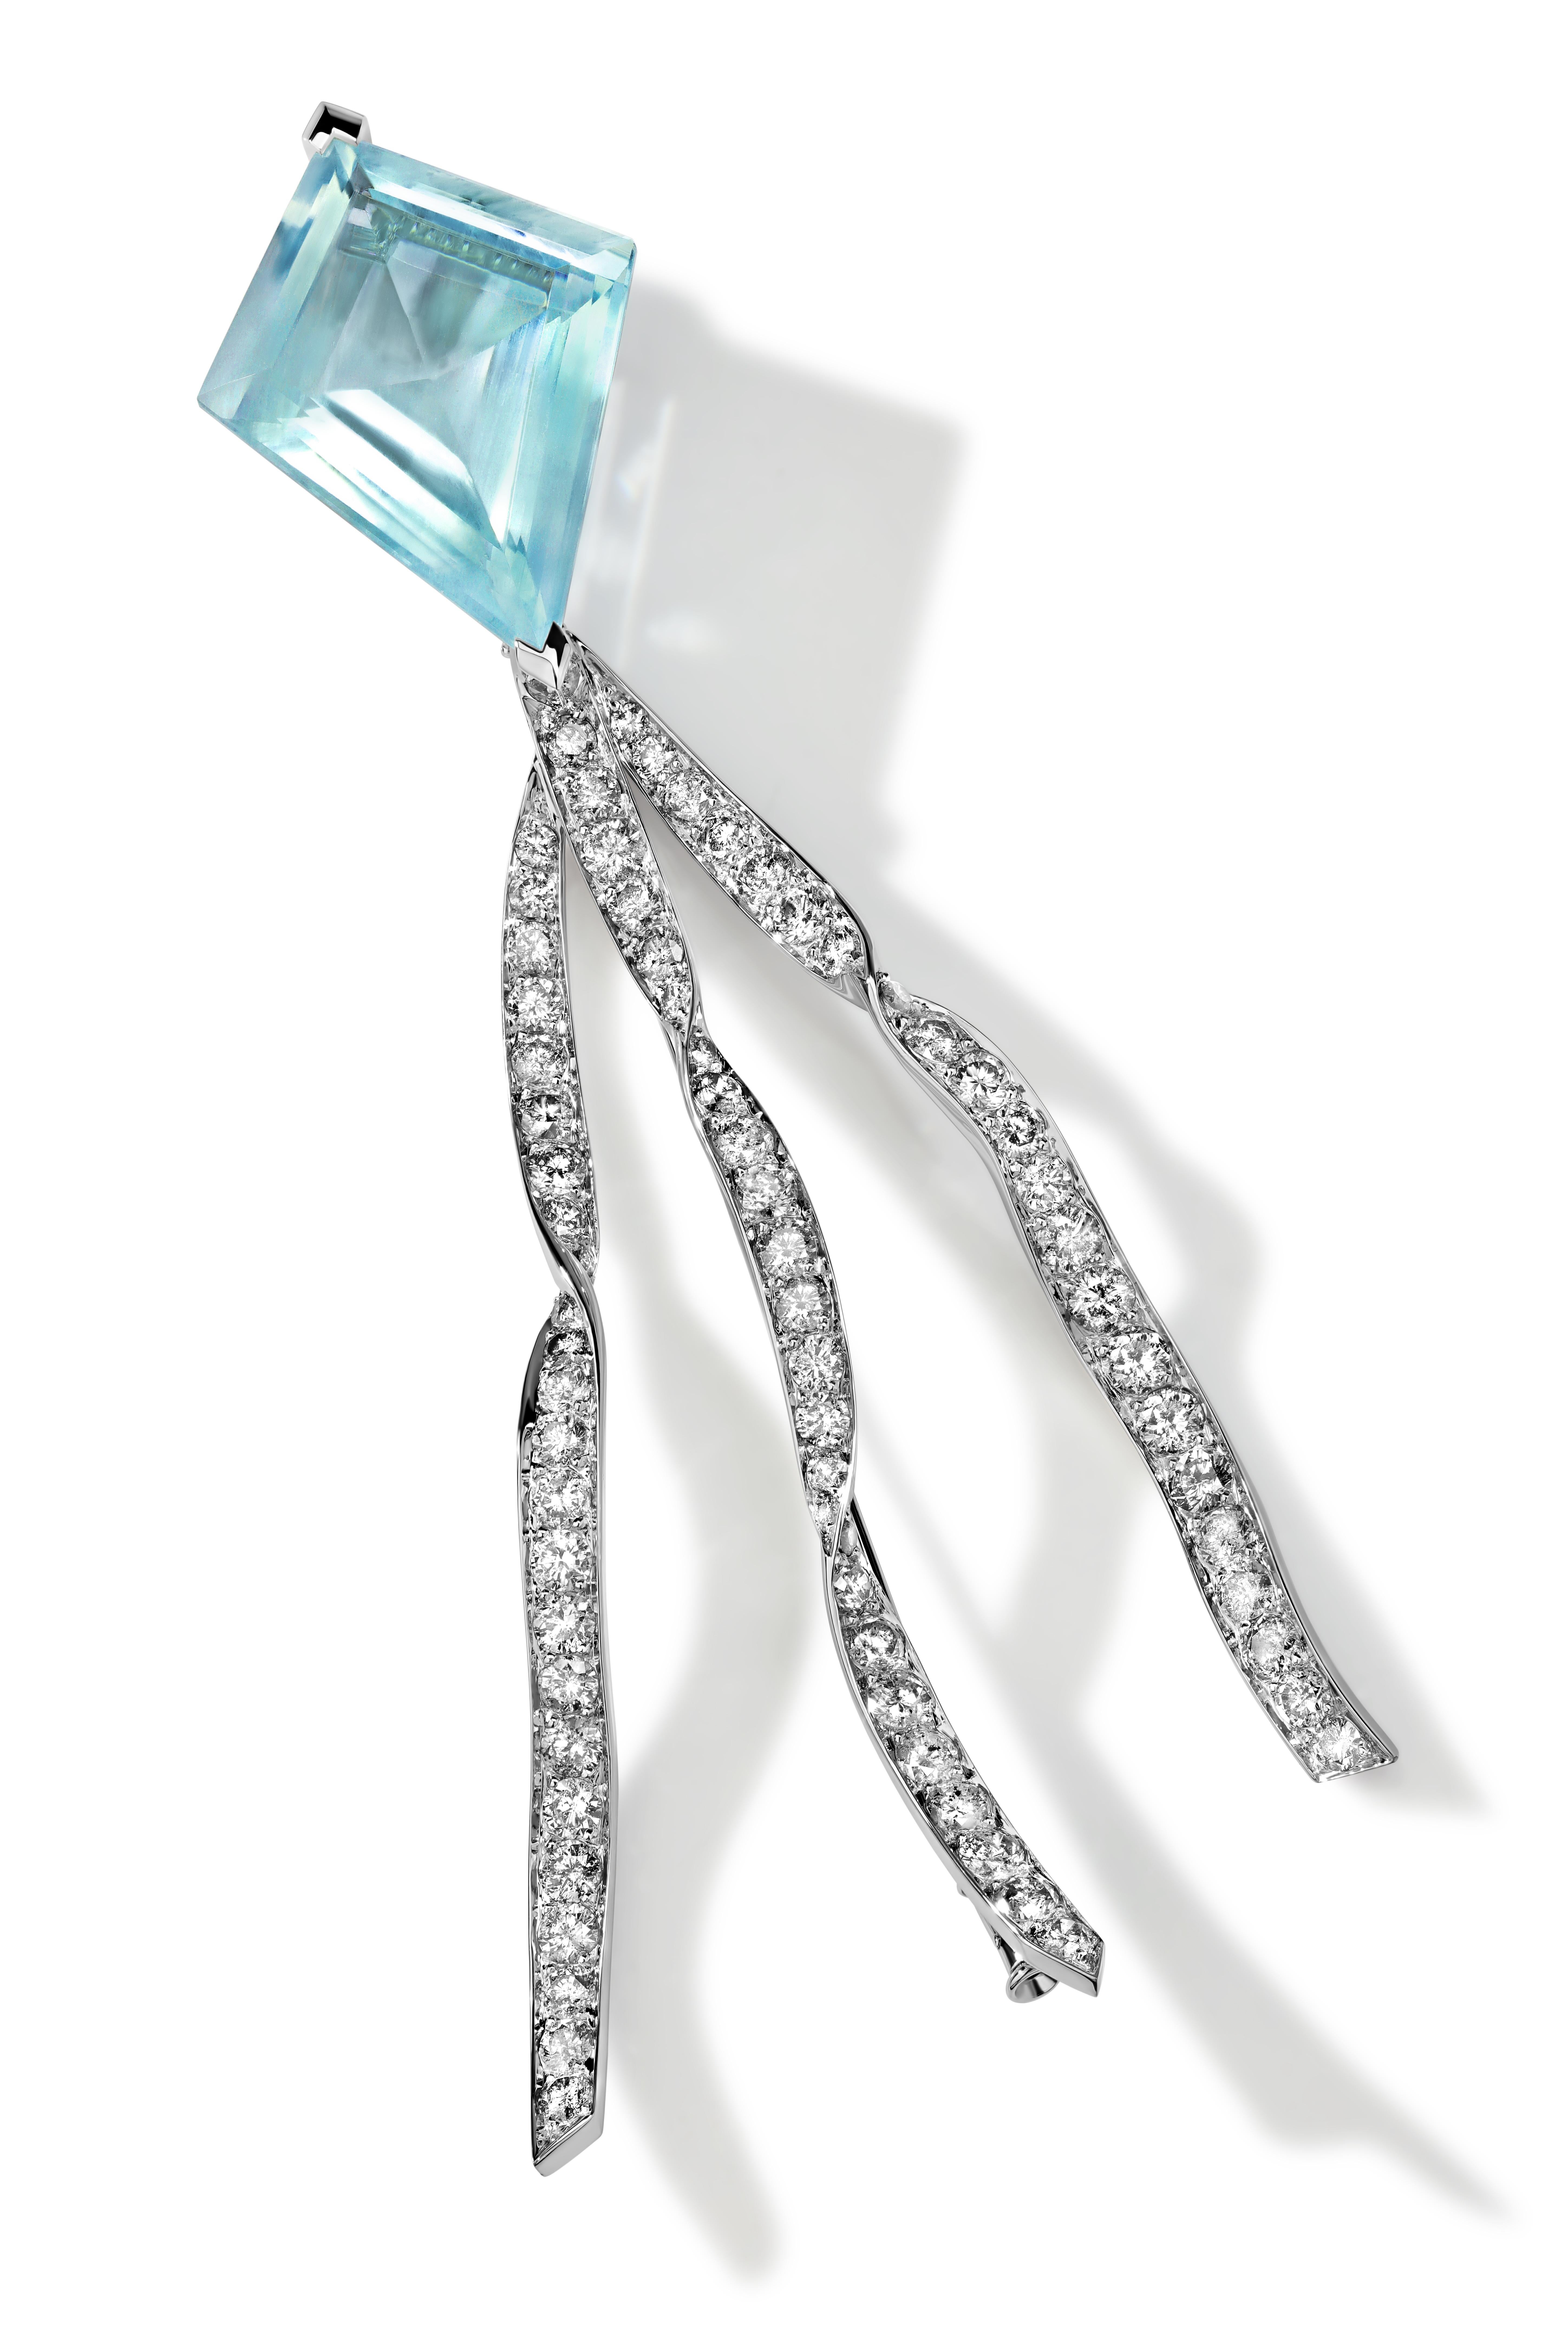 Aesthetic Movement Freedom Aquamarine brooch white gold Blue beryl 23 carats For Sale